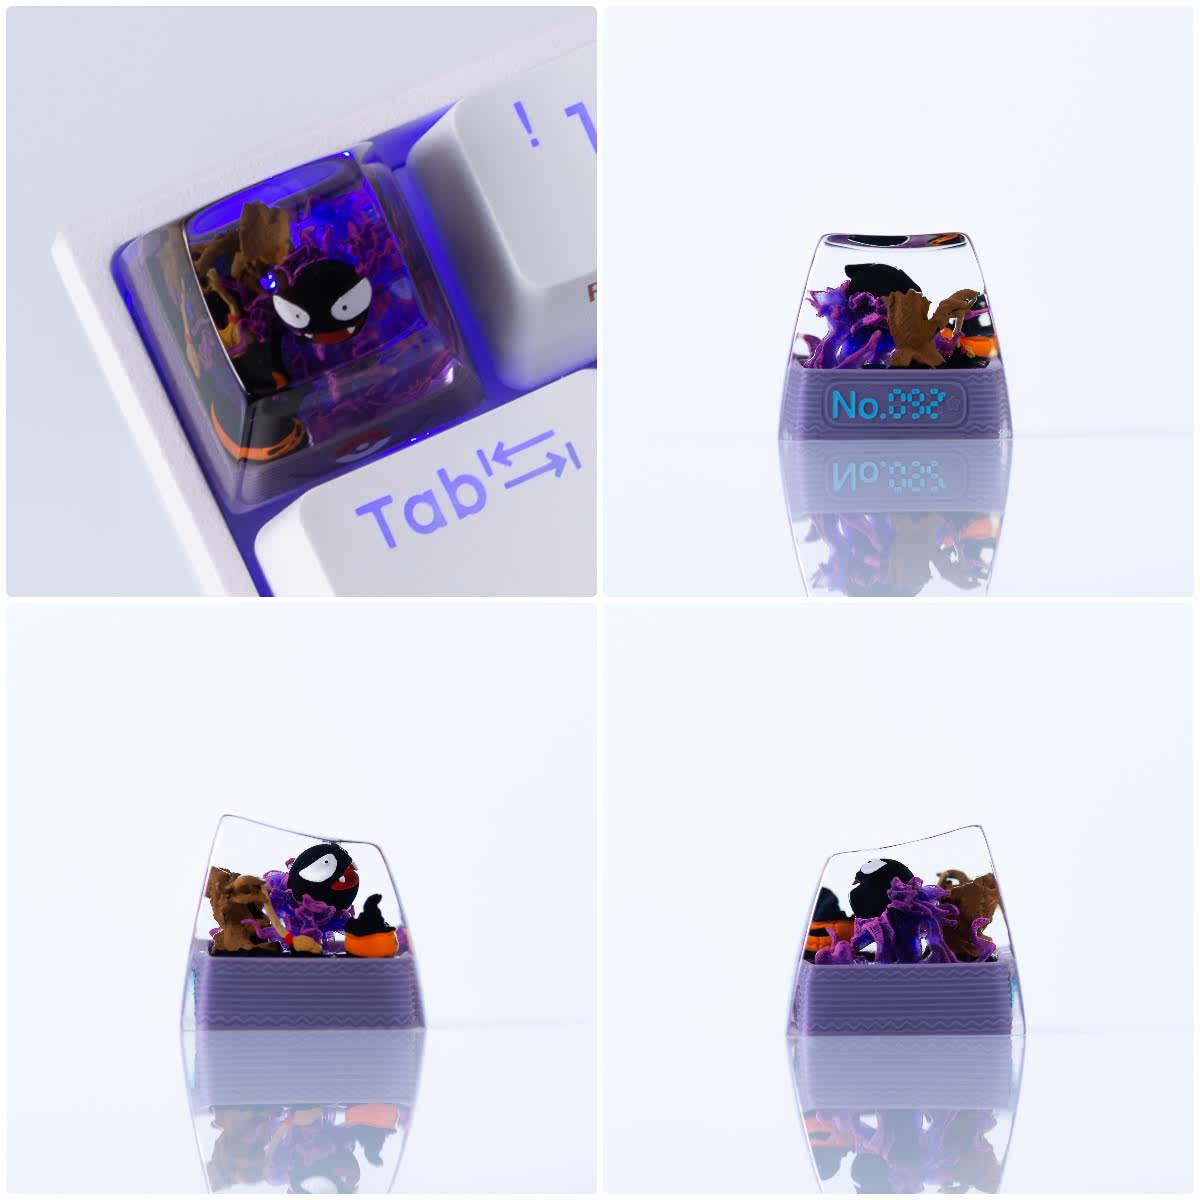 Handmade Resin Keycaps -  Gaming Mechanical Keyboard, Coolest Gifts for Him Her Men or Women - 1 Pack